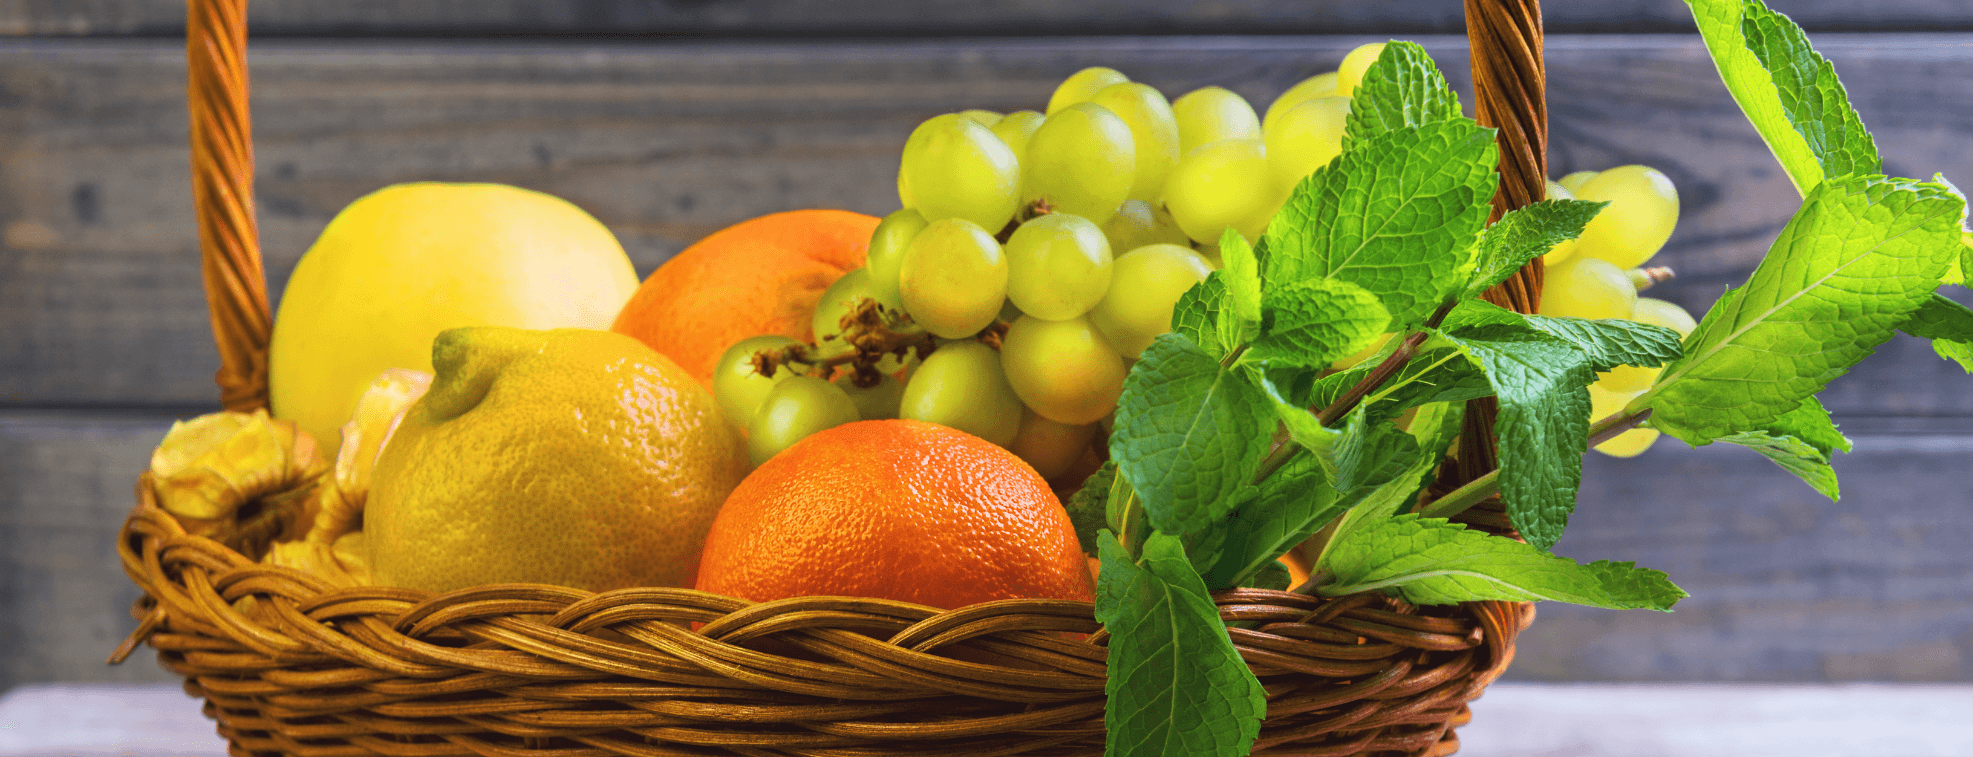 Apples, tangerines, grapes, lemons and other round fruits in a basket